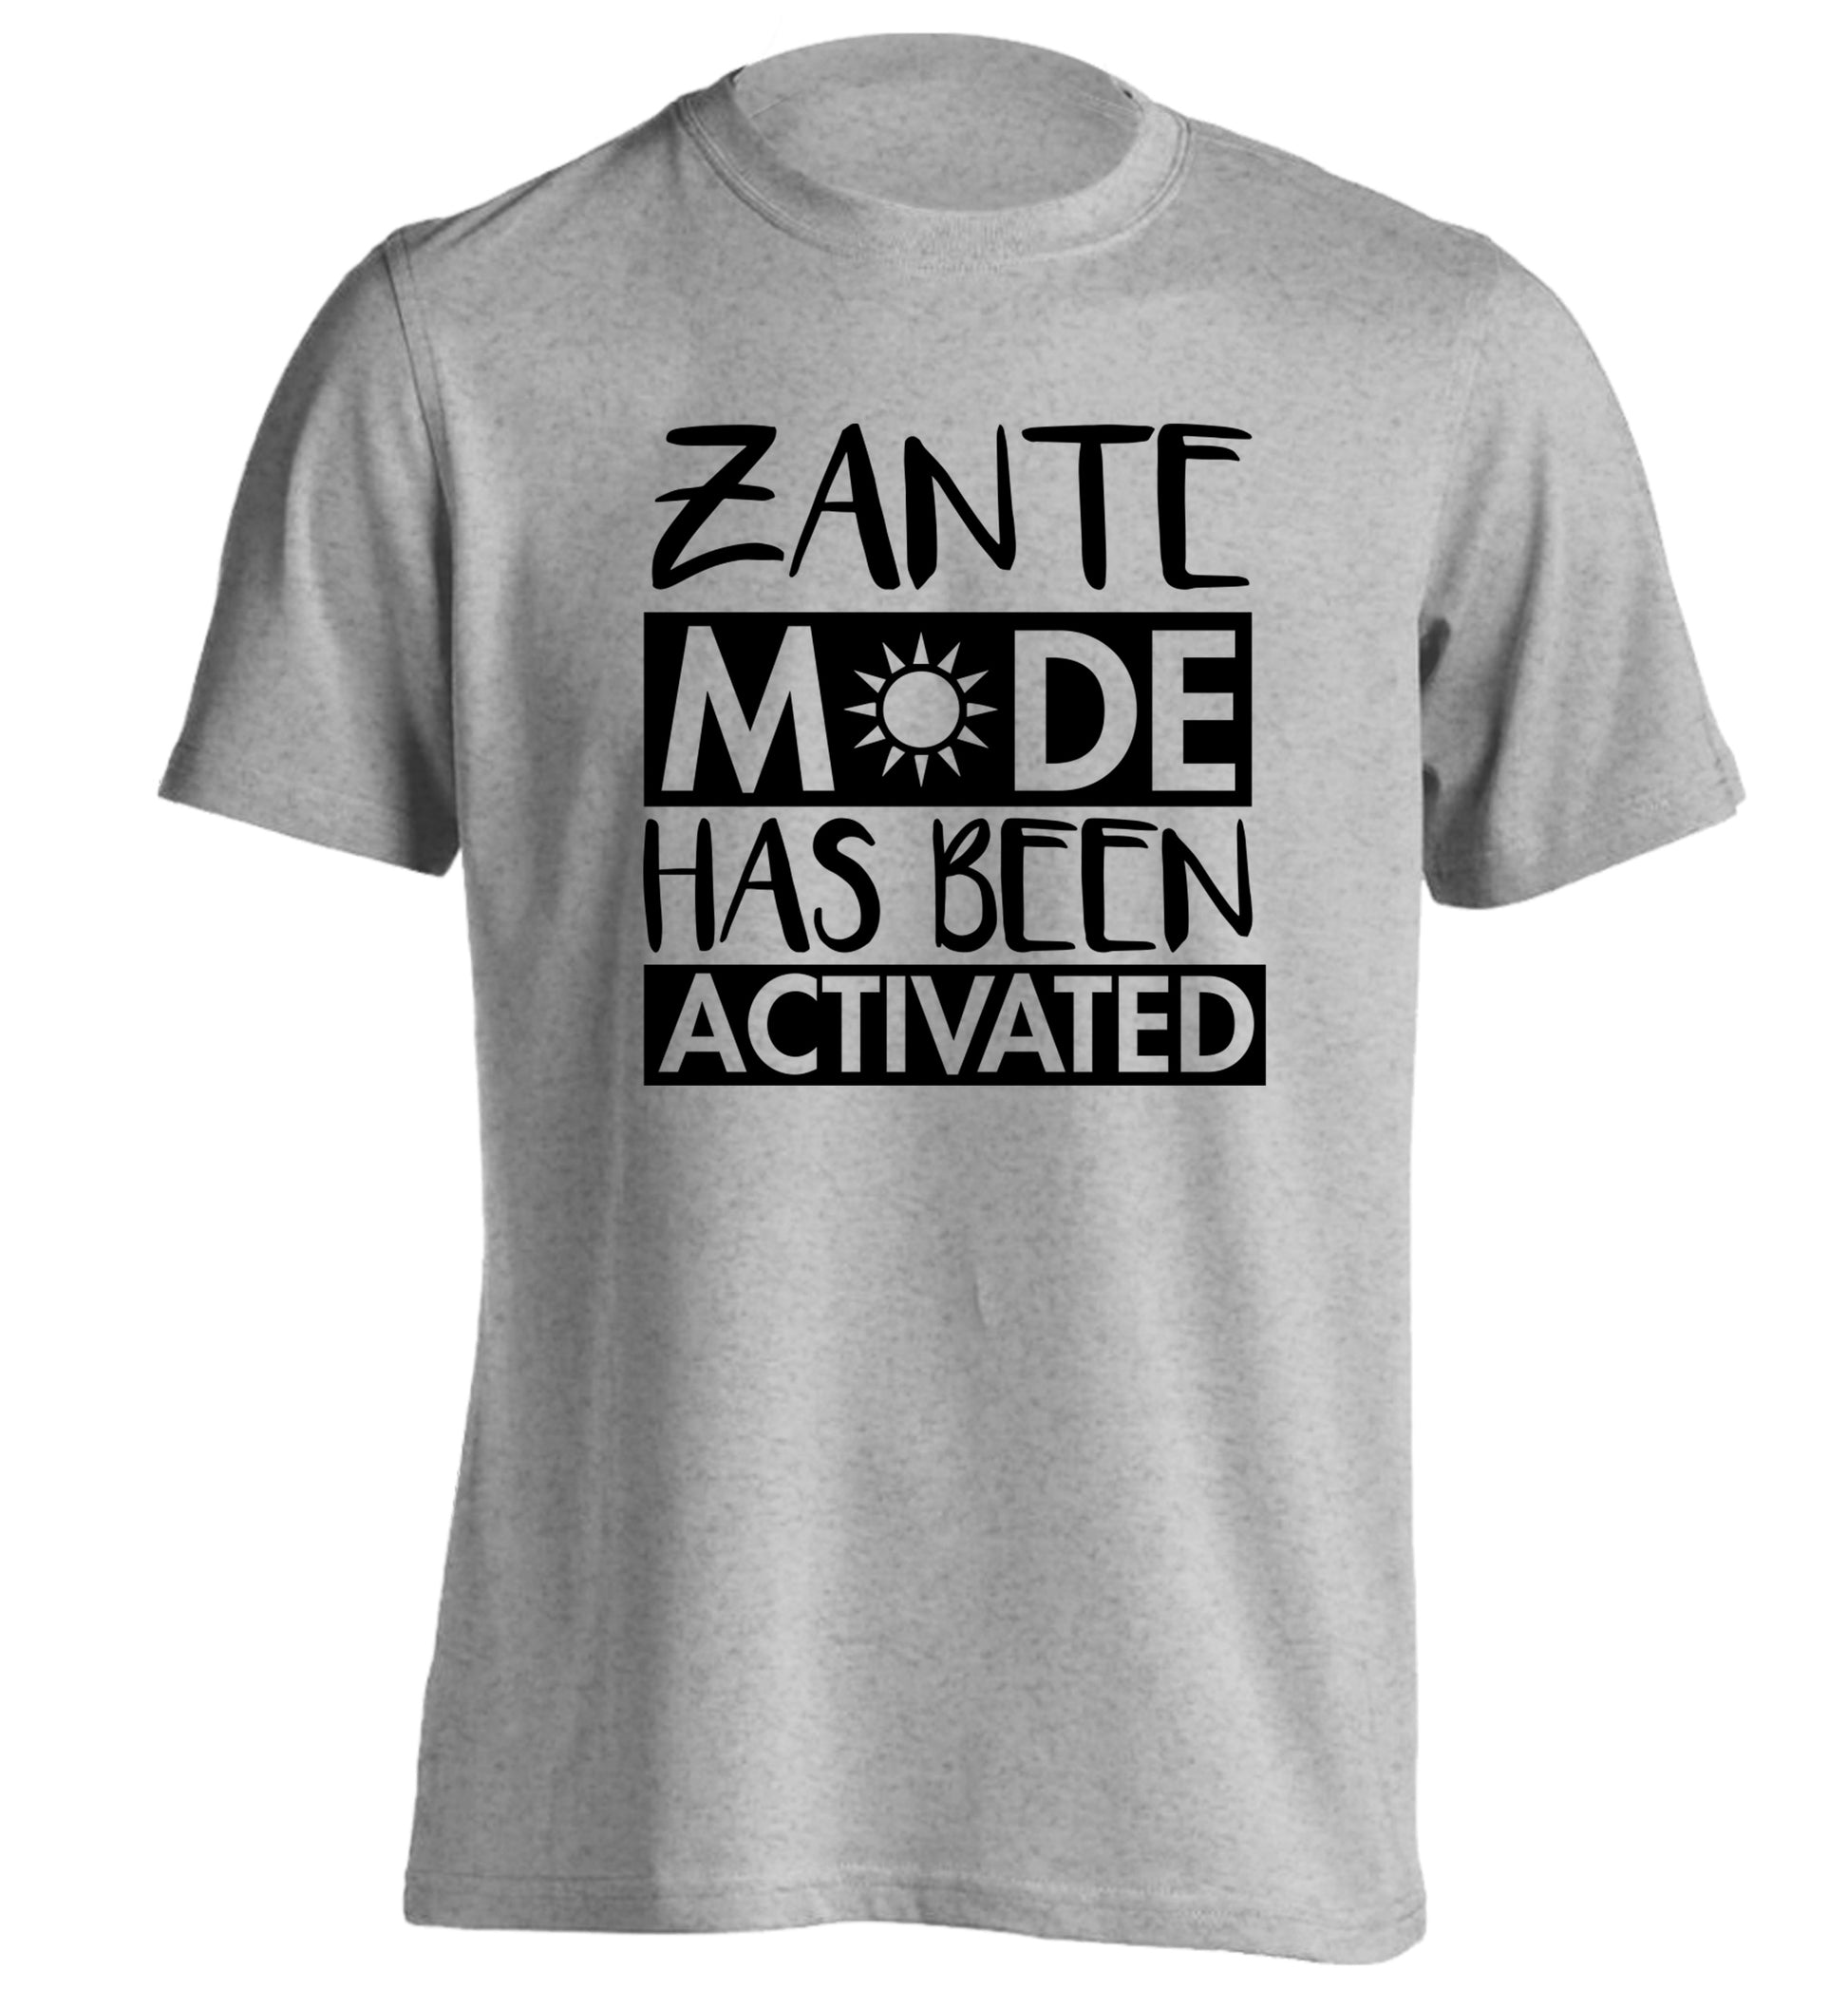 Zante mode has been activated adults unisex grey Tshirt 2XL